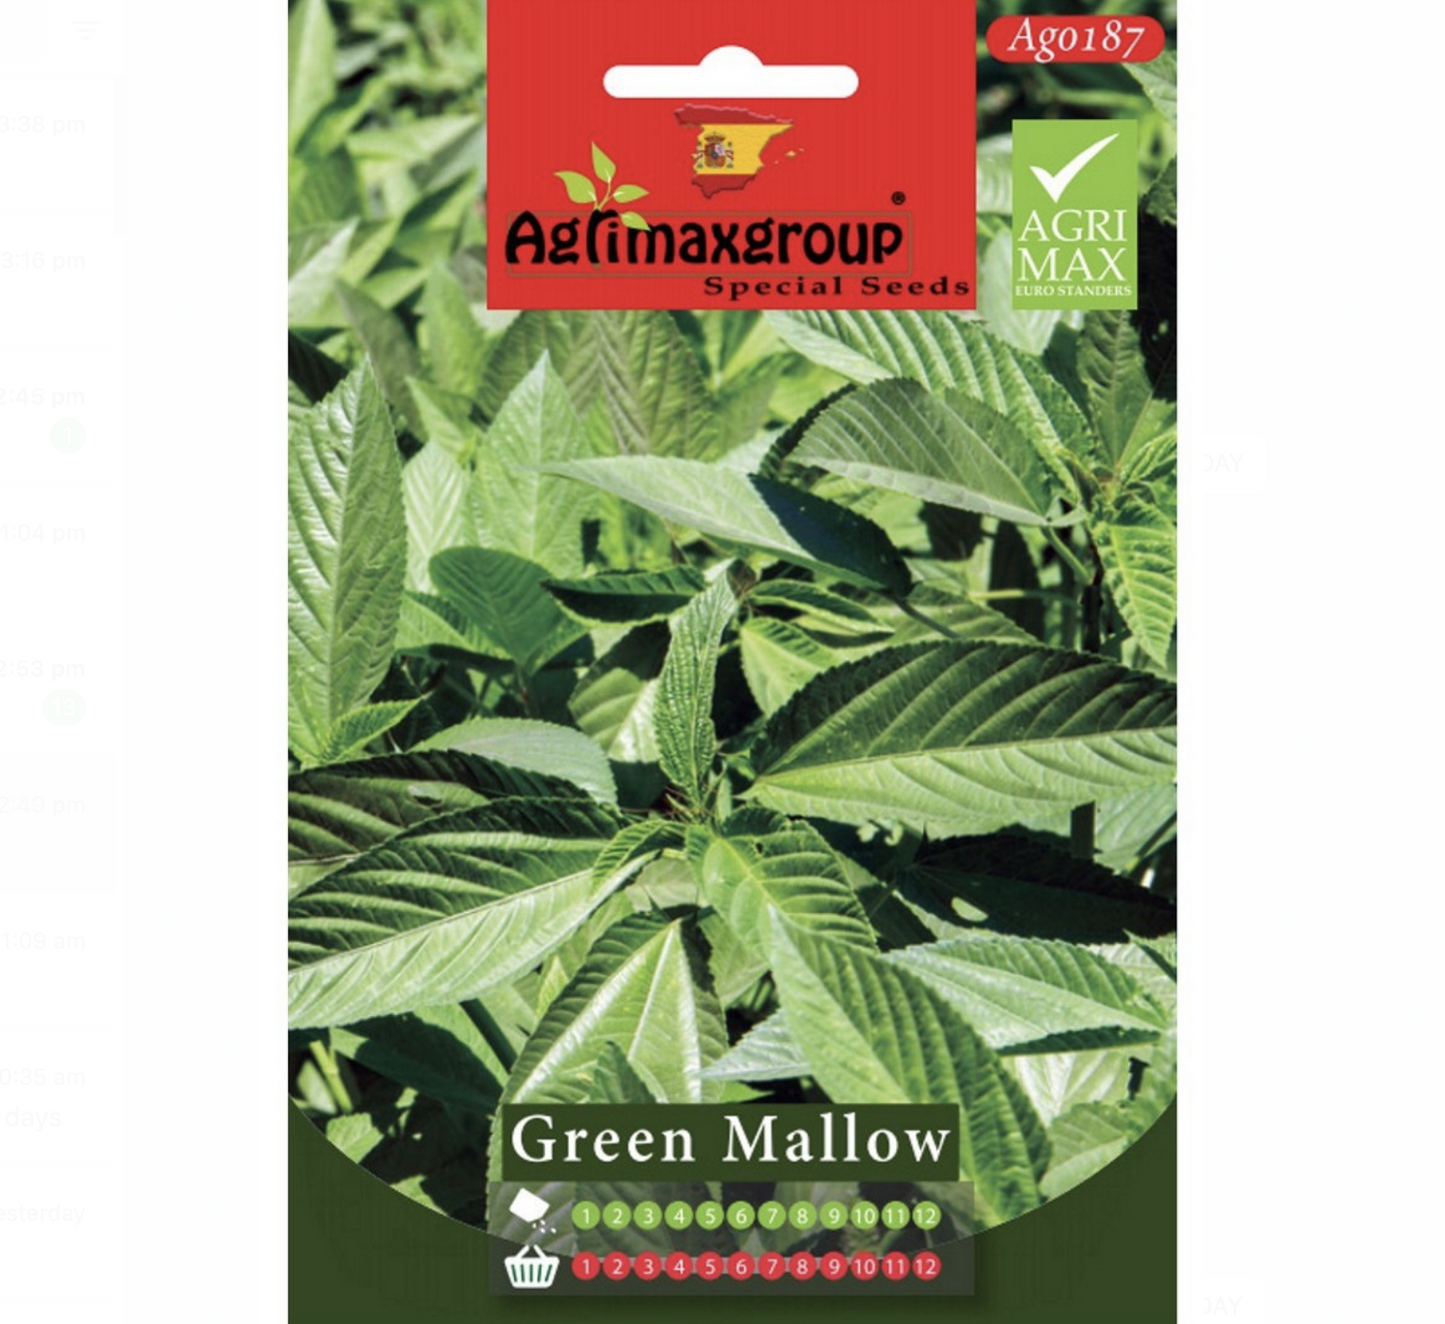 Green Mallow Agrimax Seeds